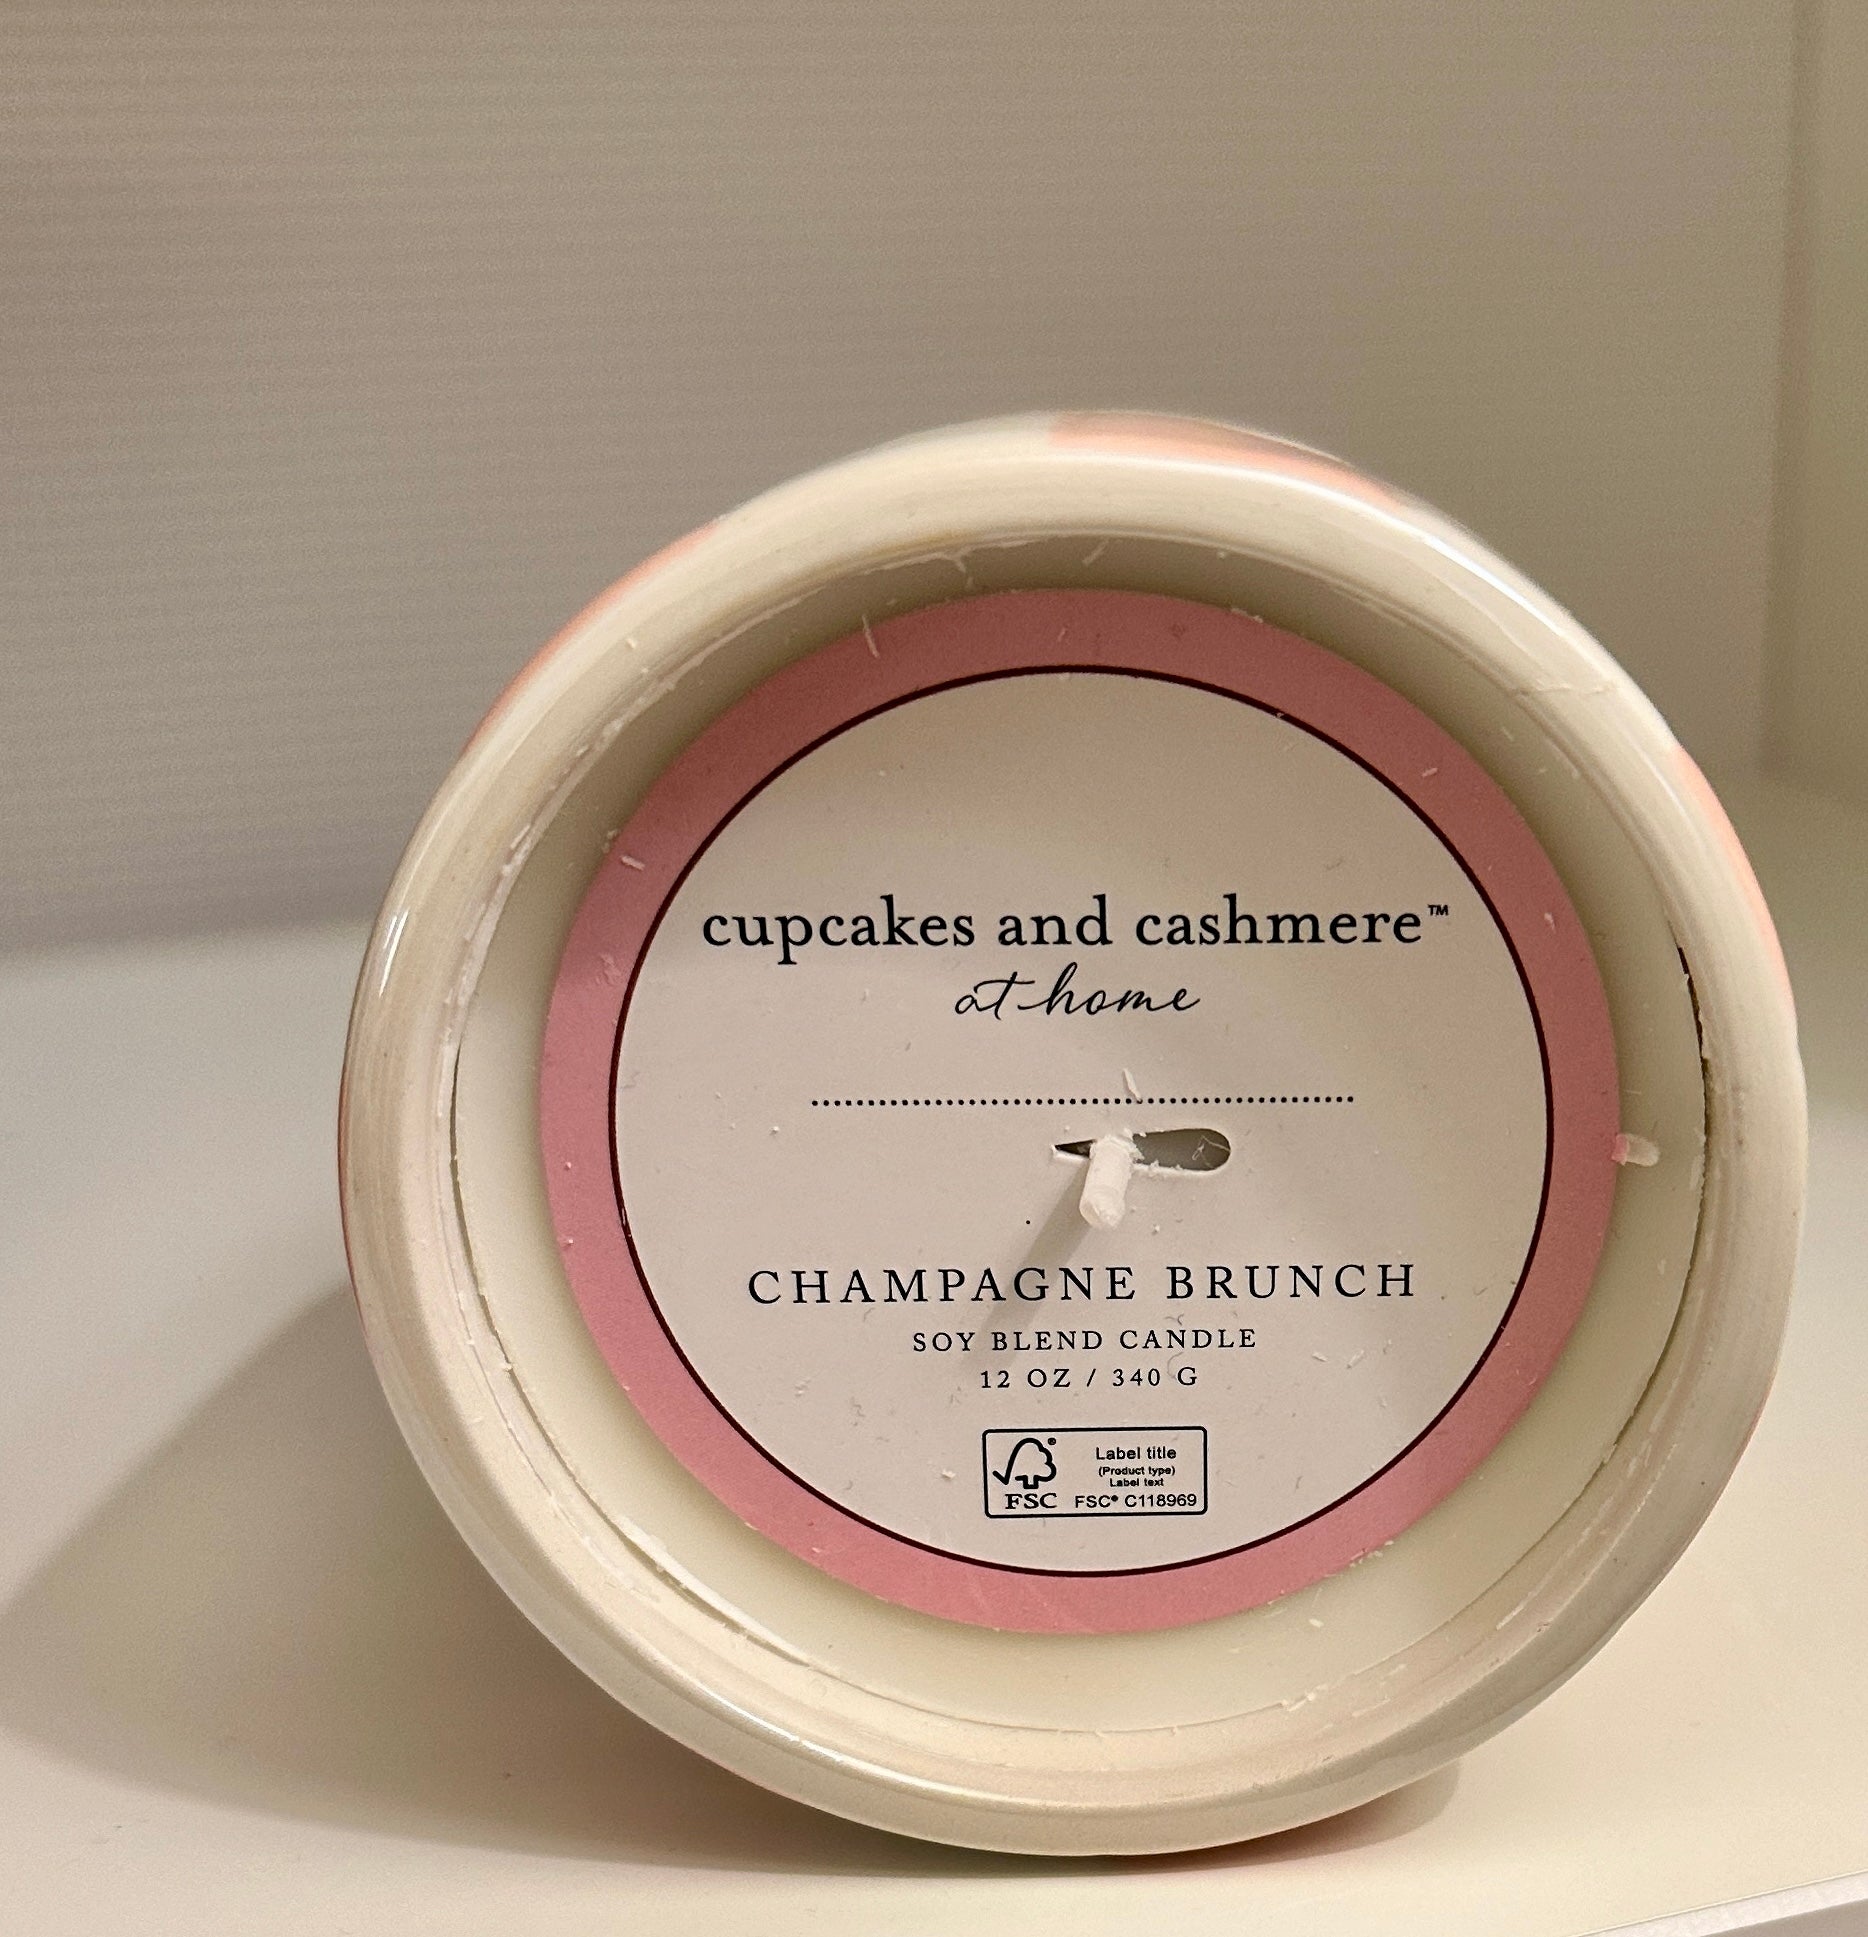 Cupcakes and Cashmere at home Candles